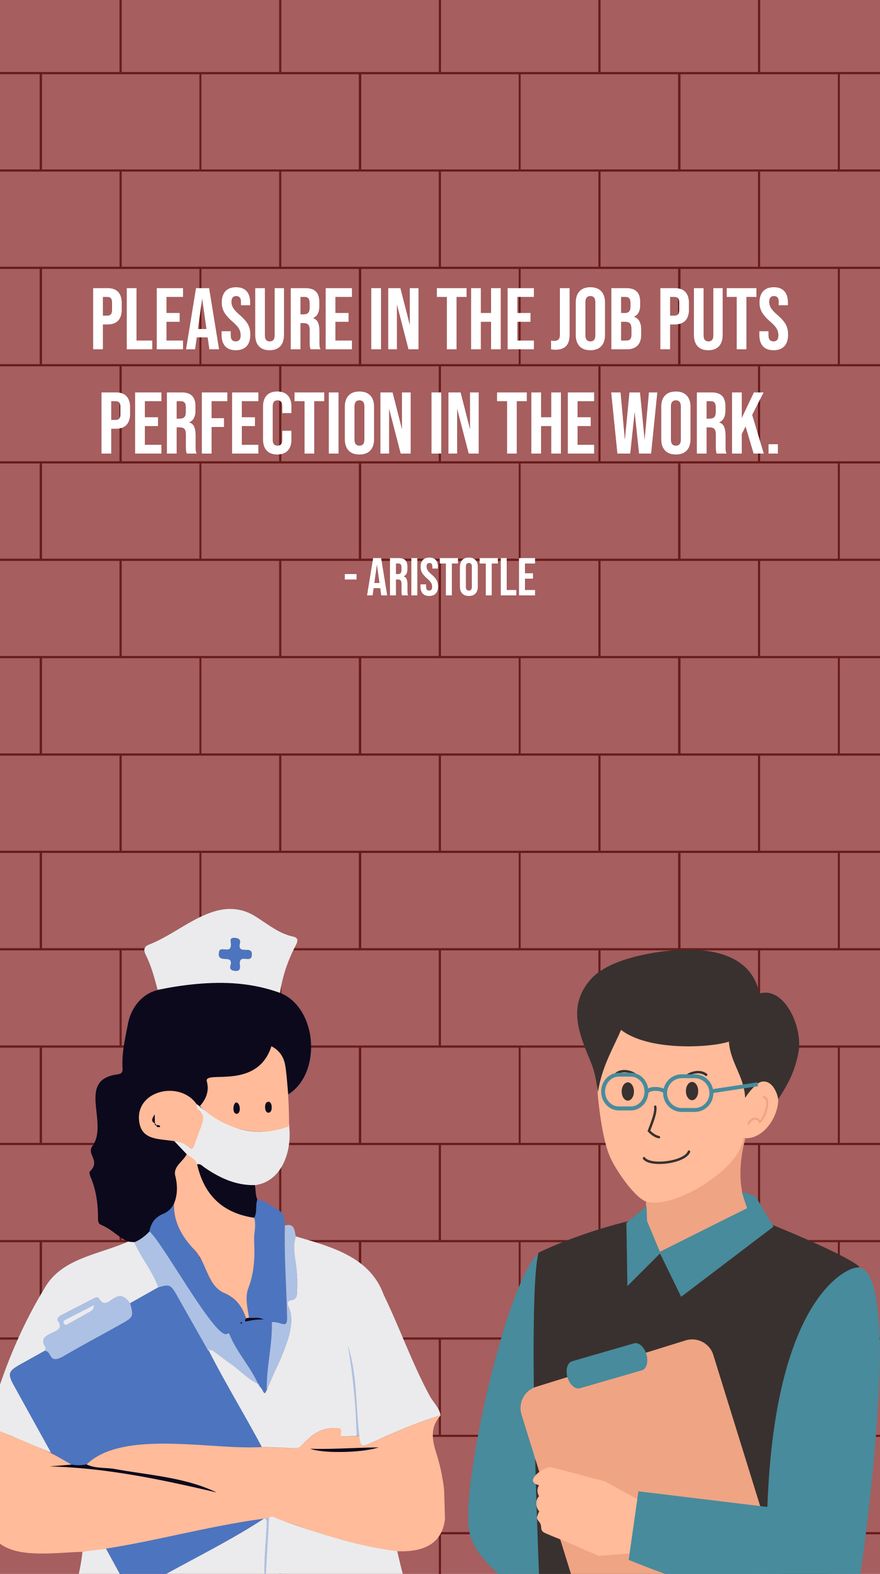 Aristotle - Pleasure in the job puts perfection in the work.